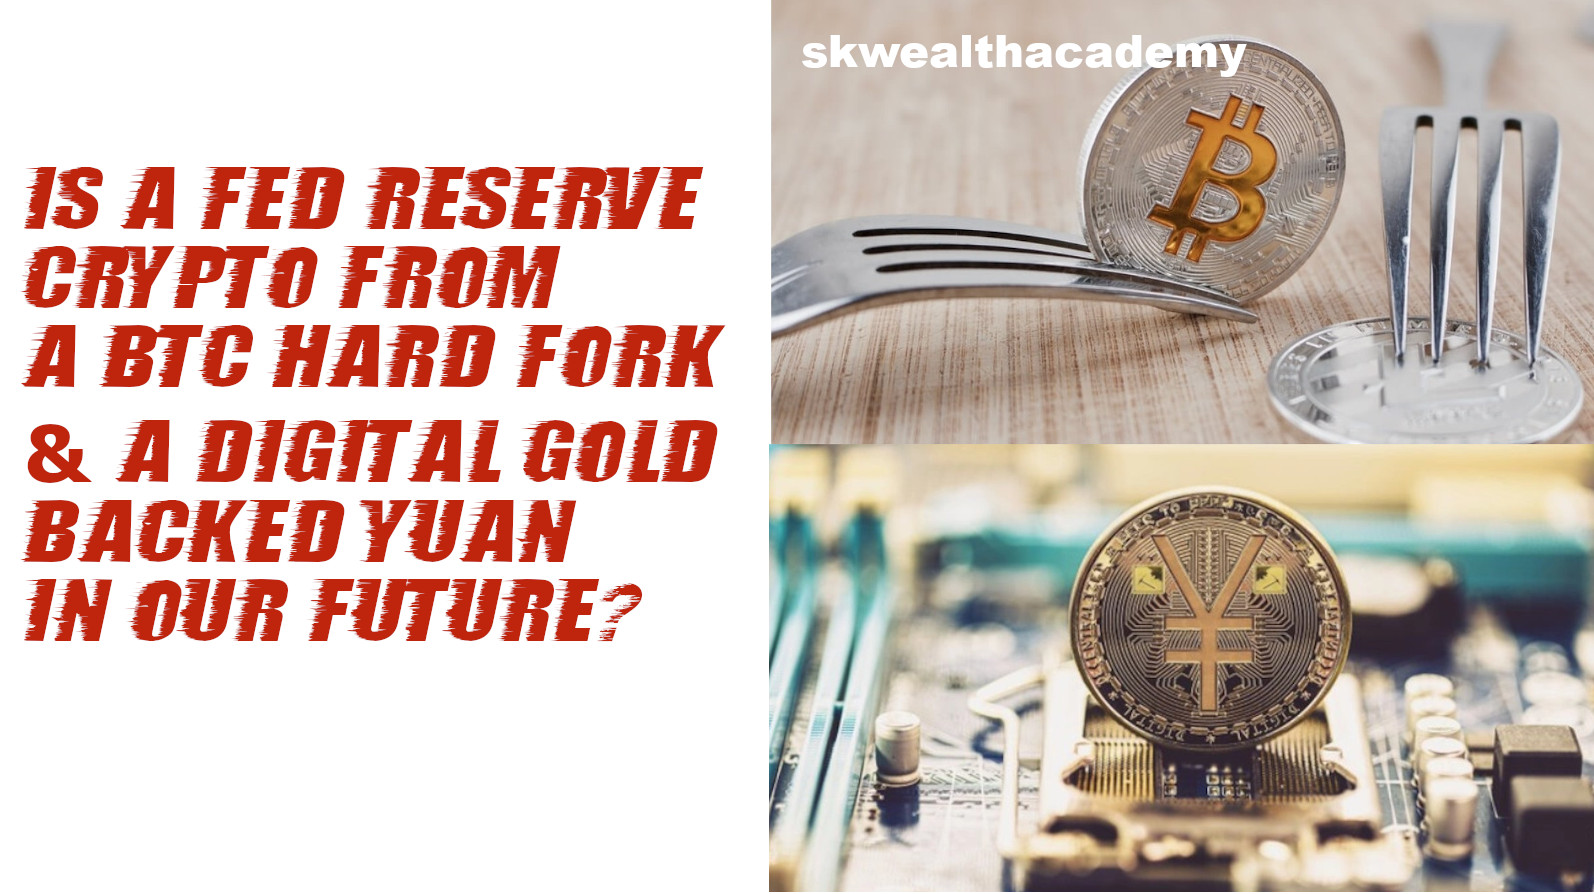 btc hard fork Central Bank cryptocurrency, gold-backed digital yuan coming?